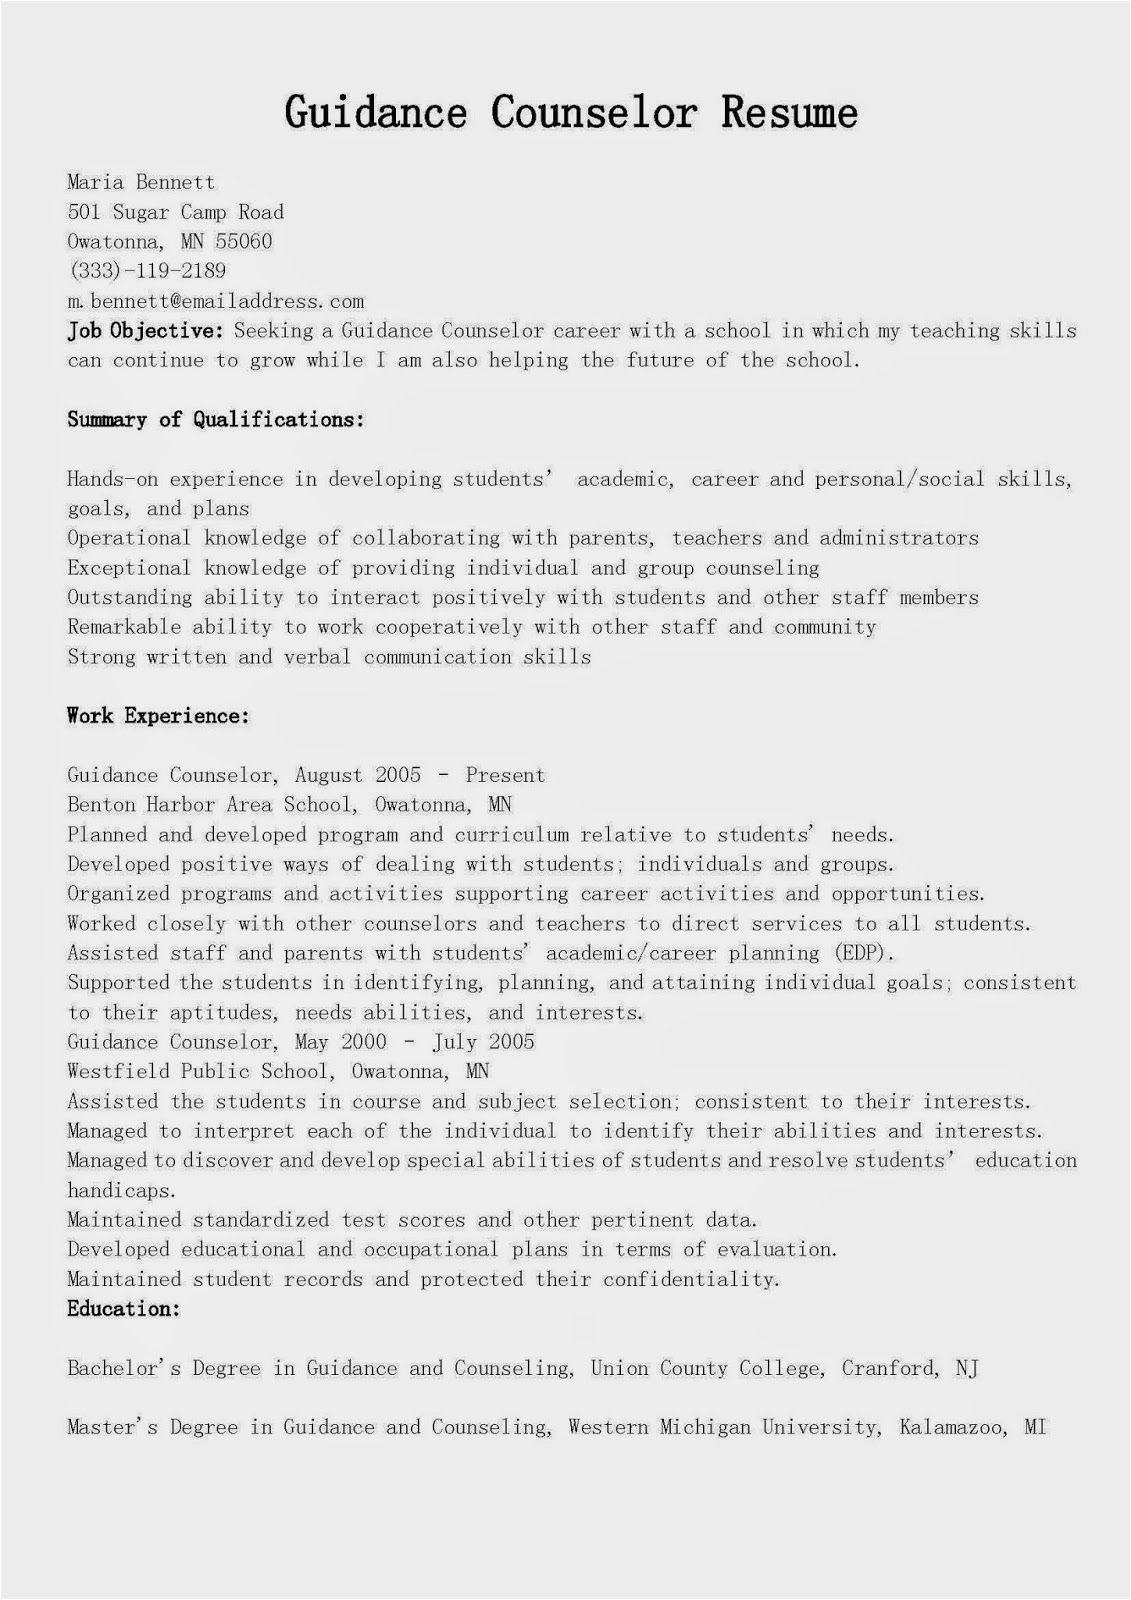 Sample Resume for Guidance Counselor Position Resume Samples Guidance Counselor Resume Sample